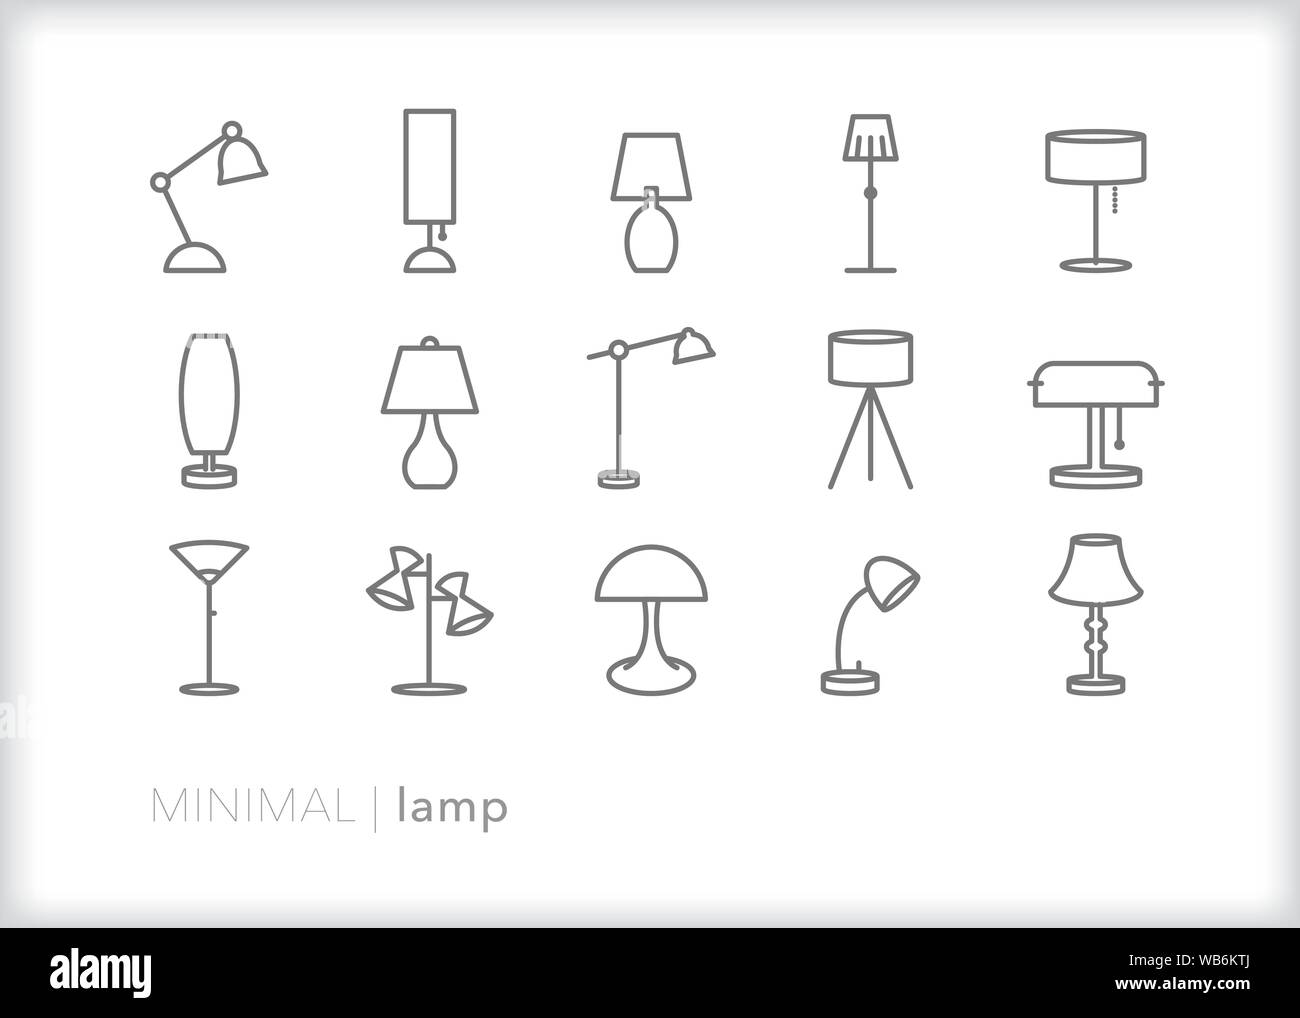 Set of 15 lamp line icons for interior home decor Stock Vector